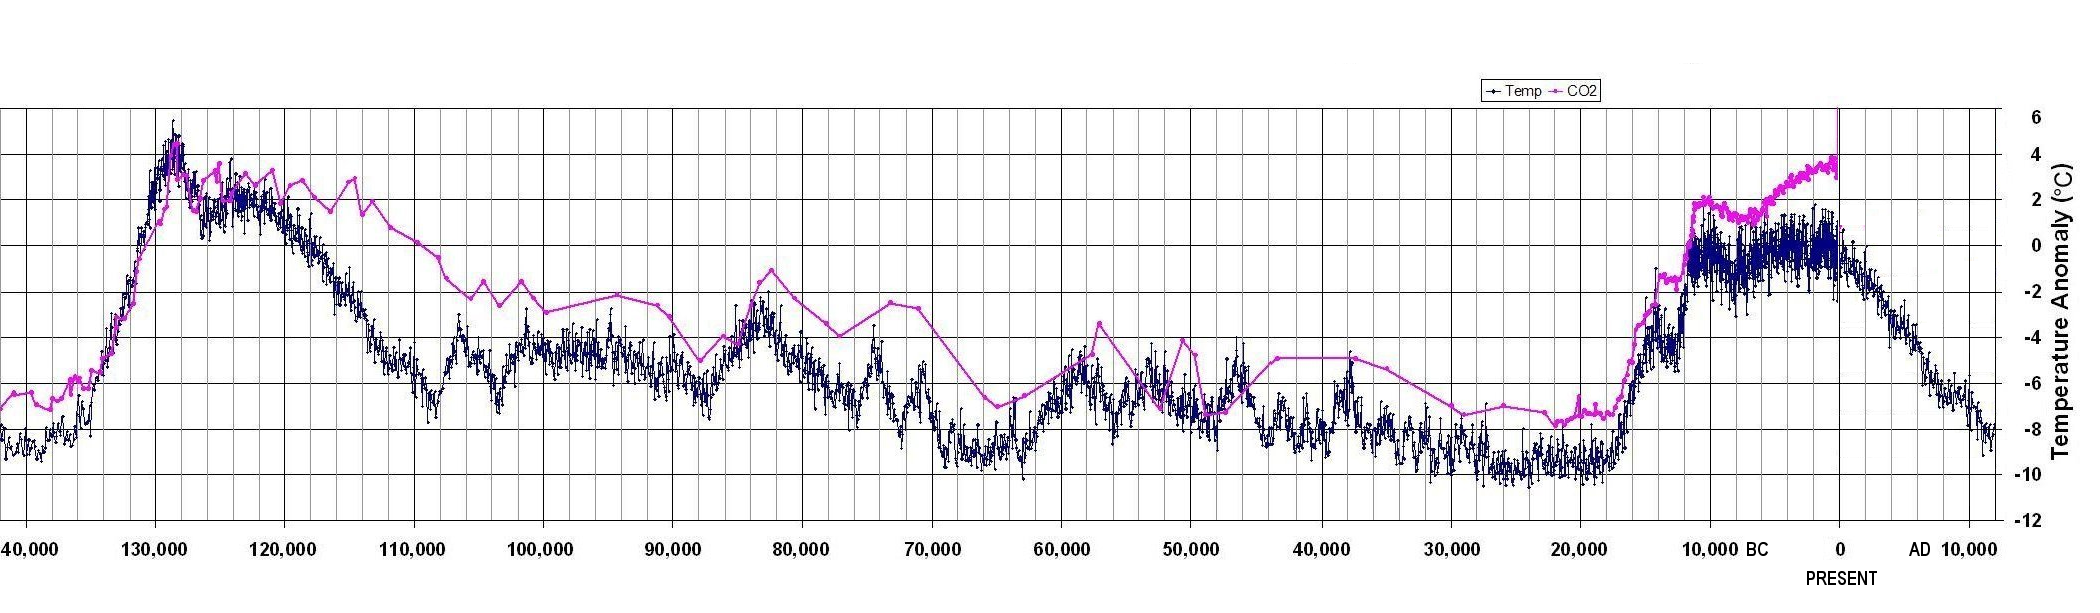 Graph of temperature and CO2 for 140k years